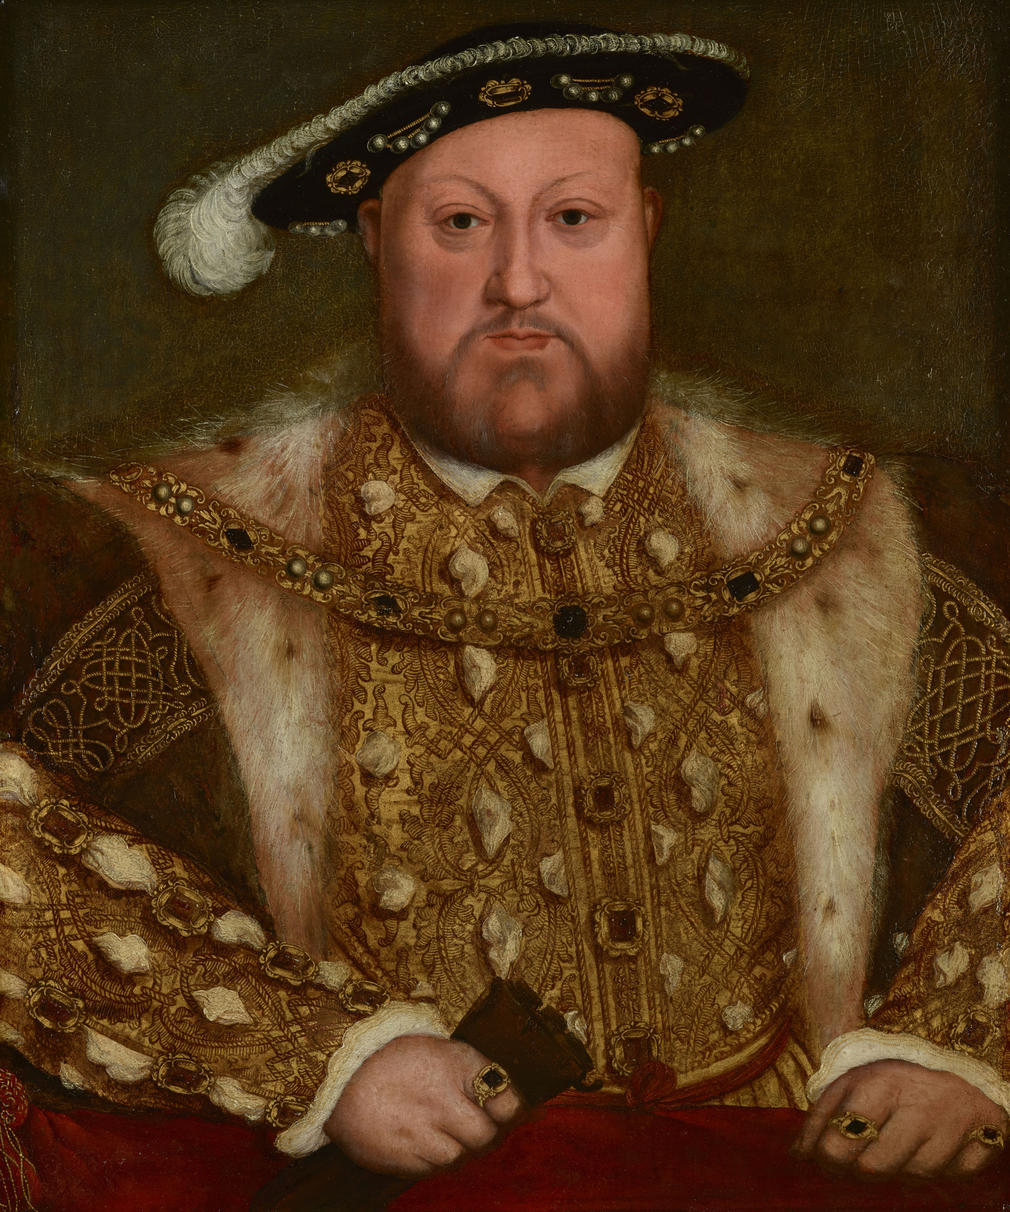 This portrait of Henry VIII is an early derivation of Holbein's original portrait of the King, painted in 1537 on the wall of the Privy Chamber at Whitehall (see RCIN 405750). It was probably painted later in the sixteenth century.

The panel seems to h